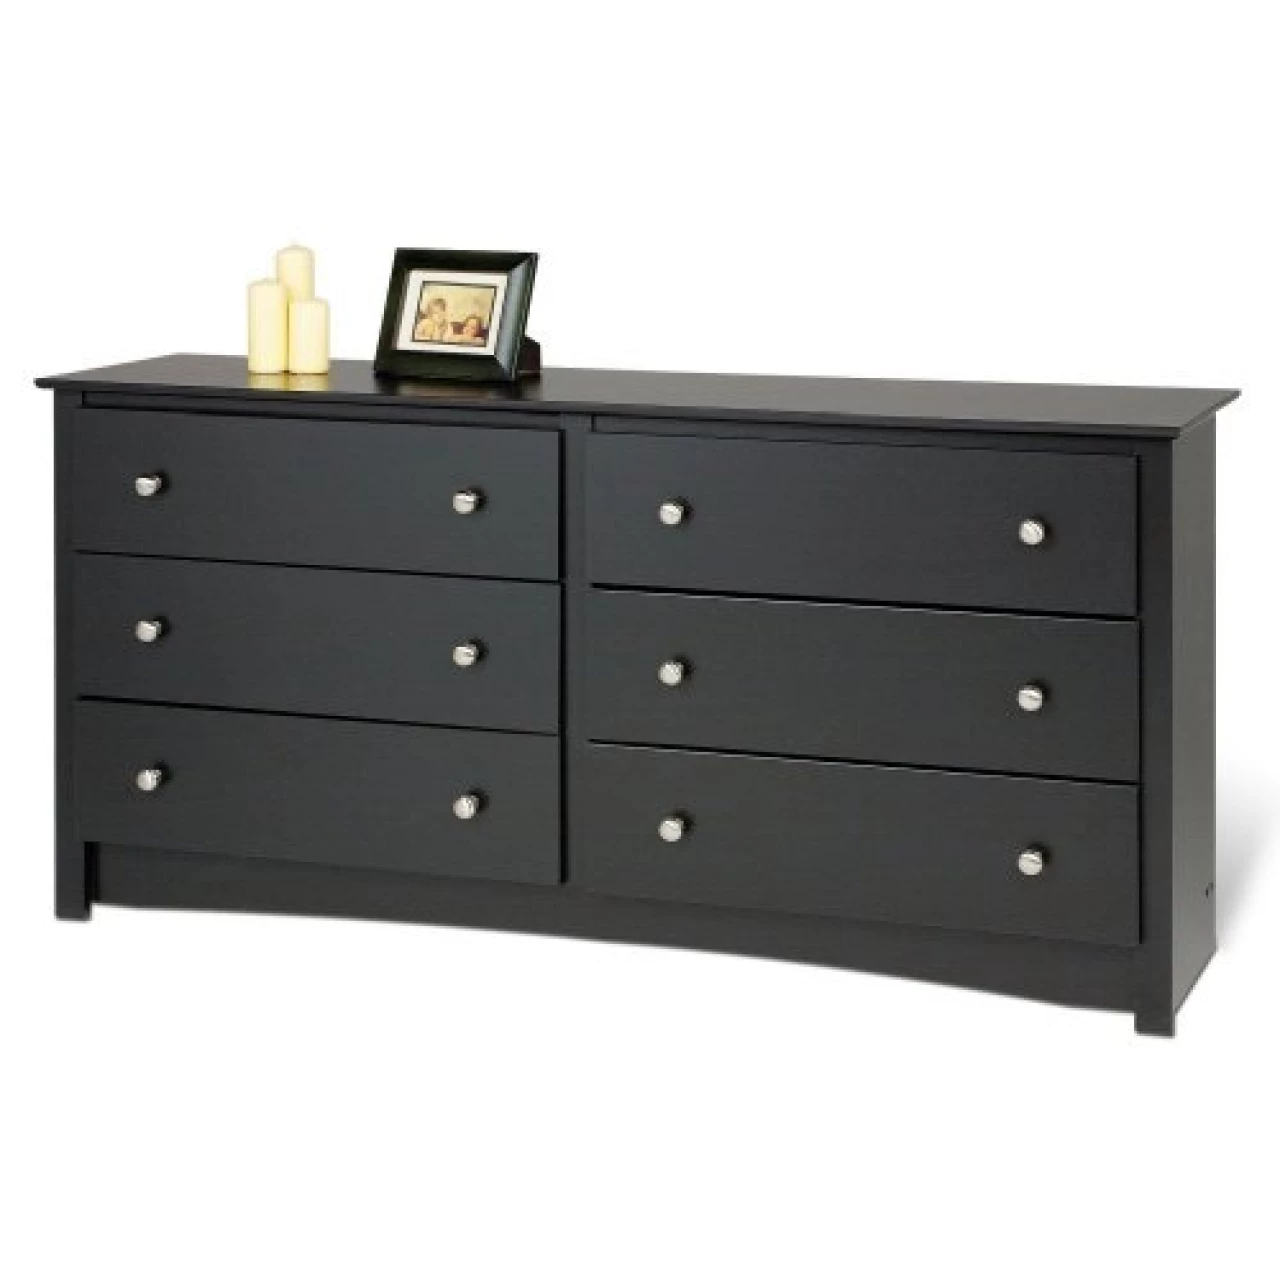 Prepac Sonoma Bedroom Furniture: Black Double Dresser for Bedroom, 6-Drawer Wide Chest of Drawers